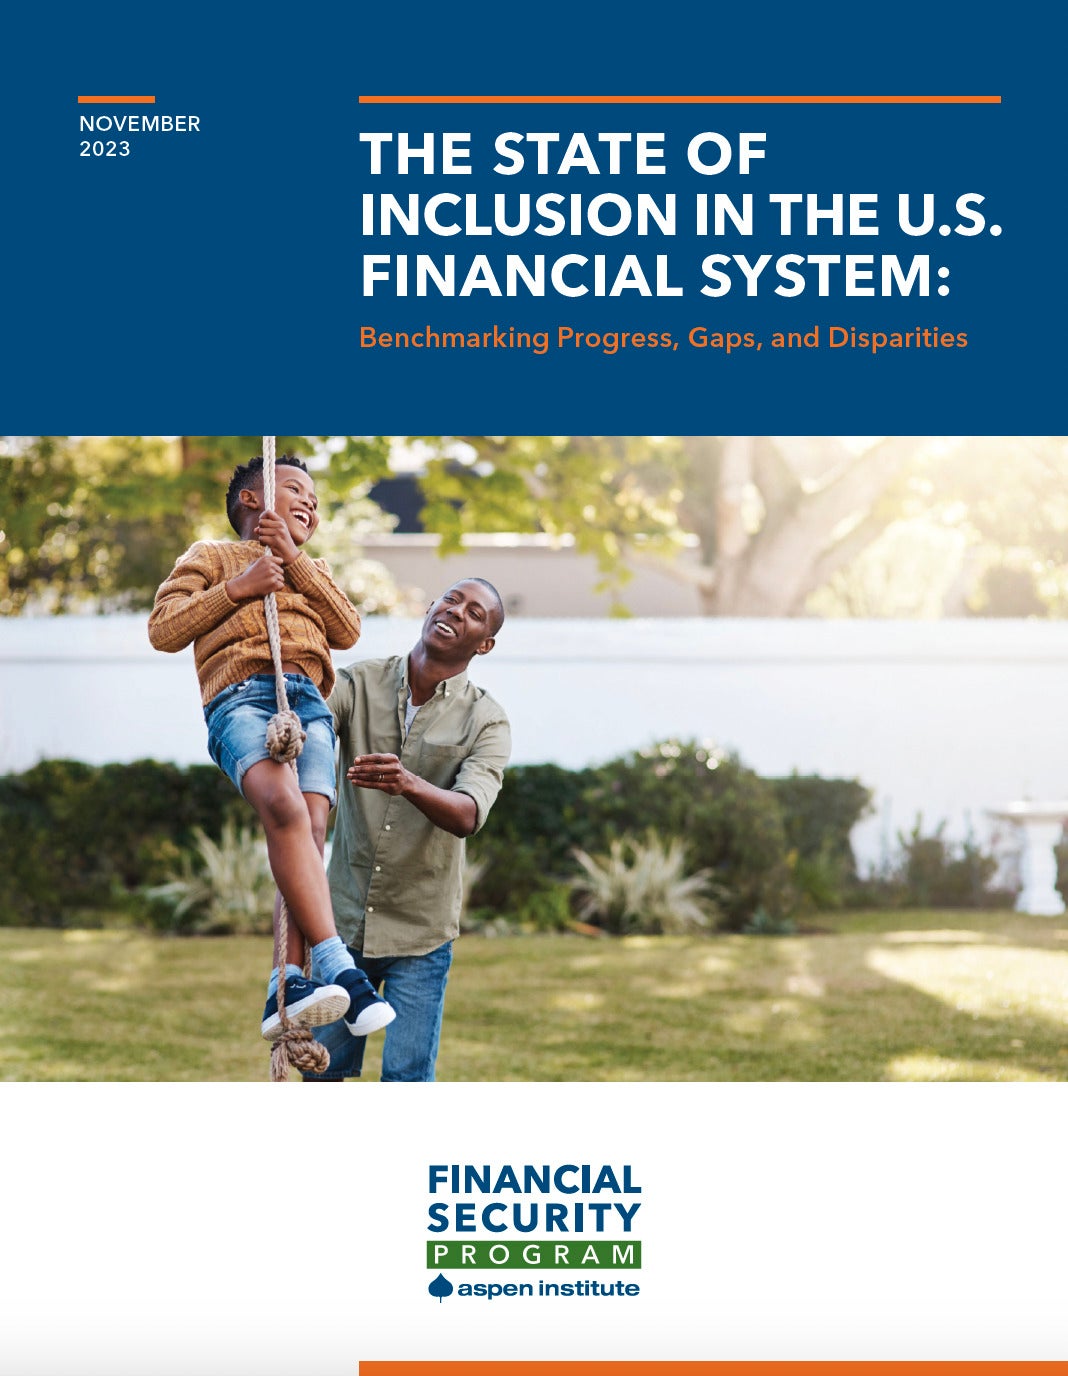 The State of Inclusion in the the U.S. Financial System